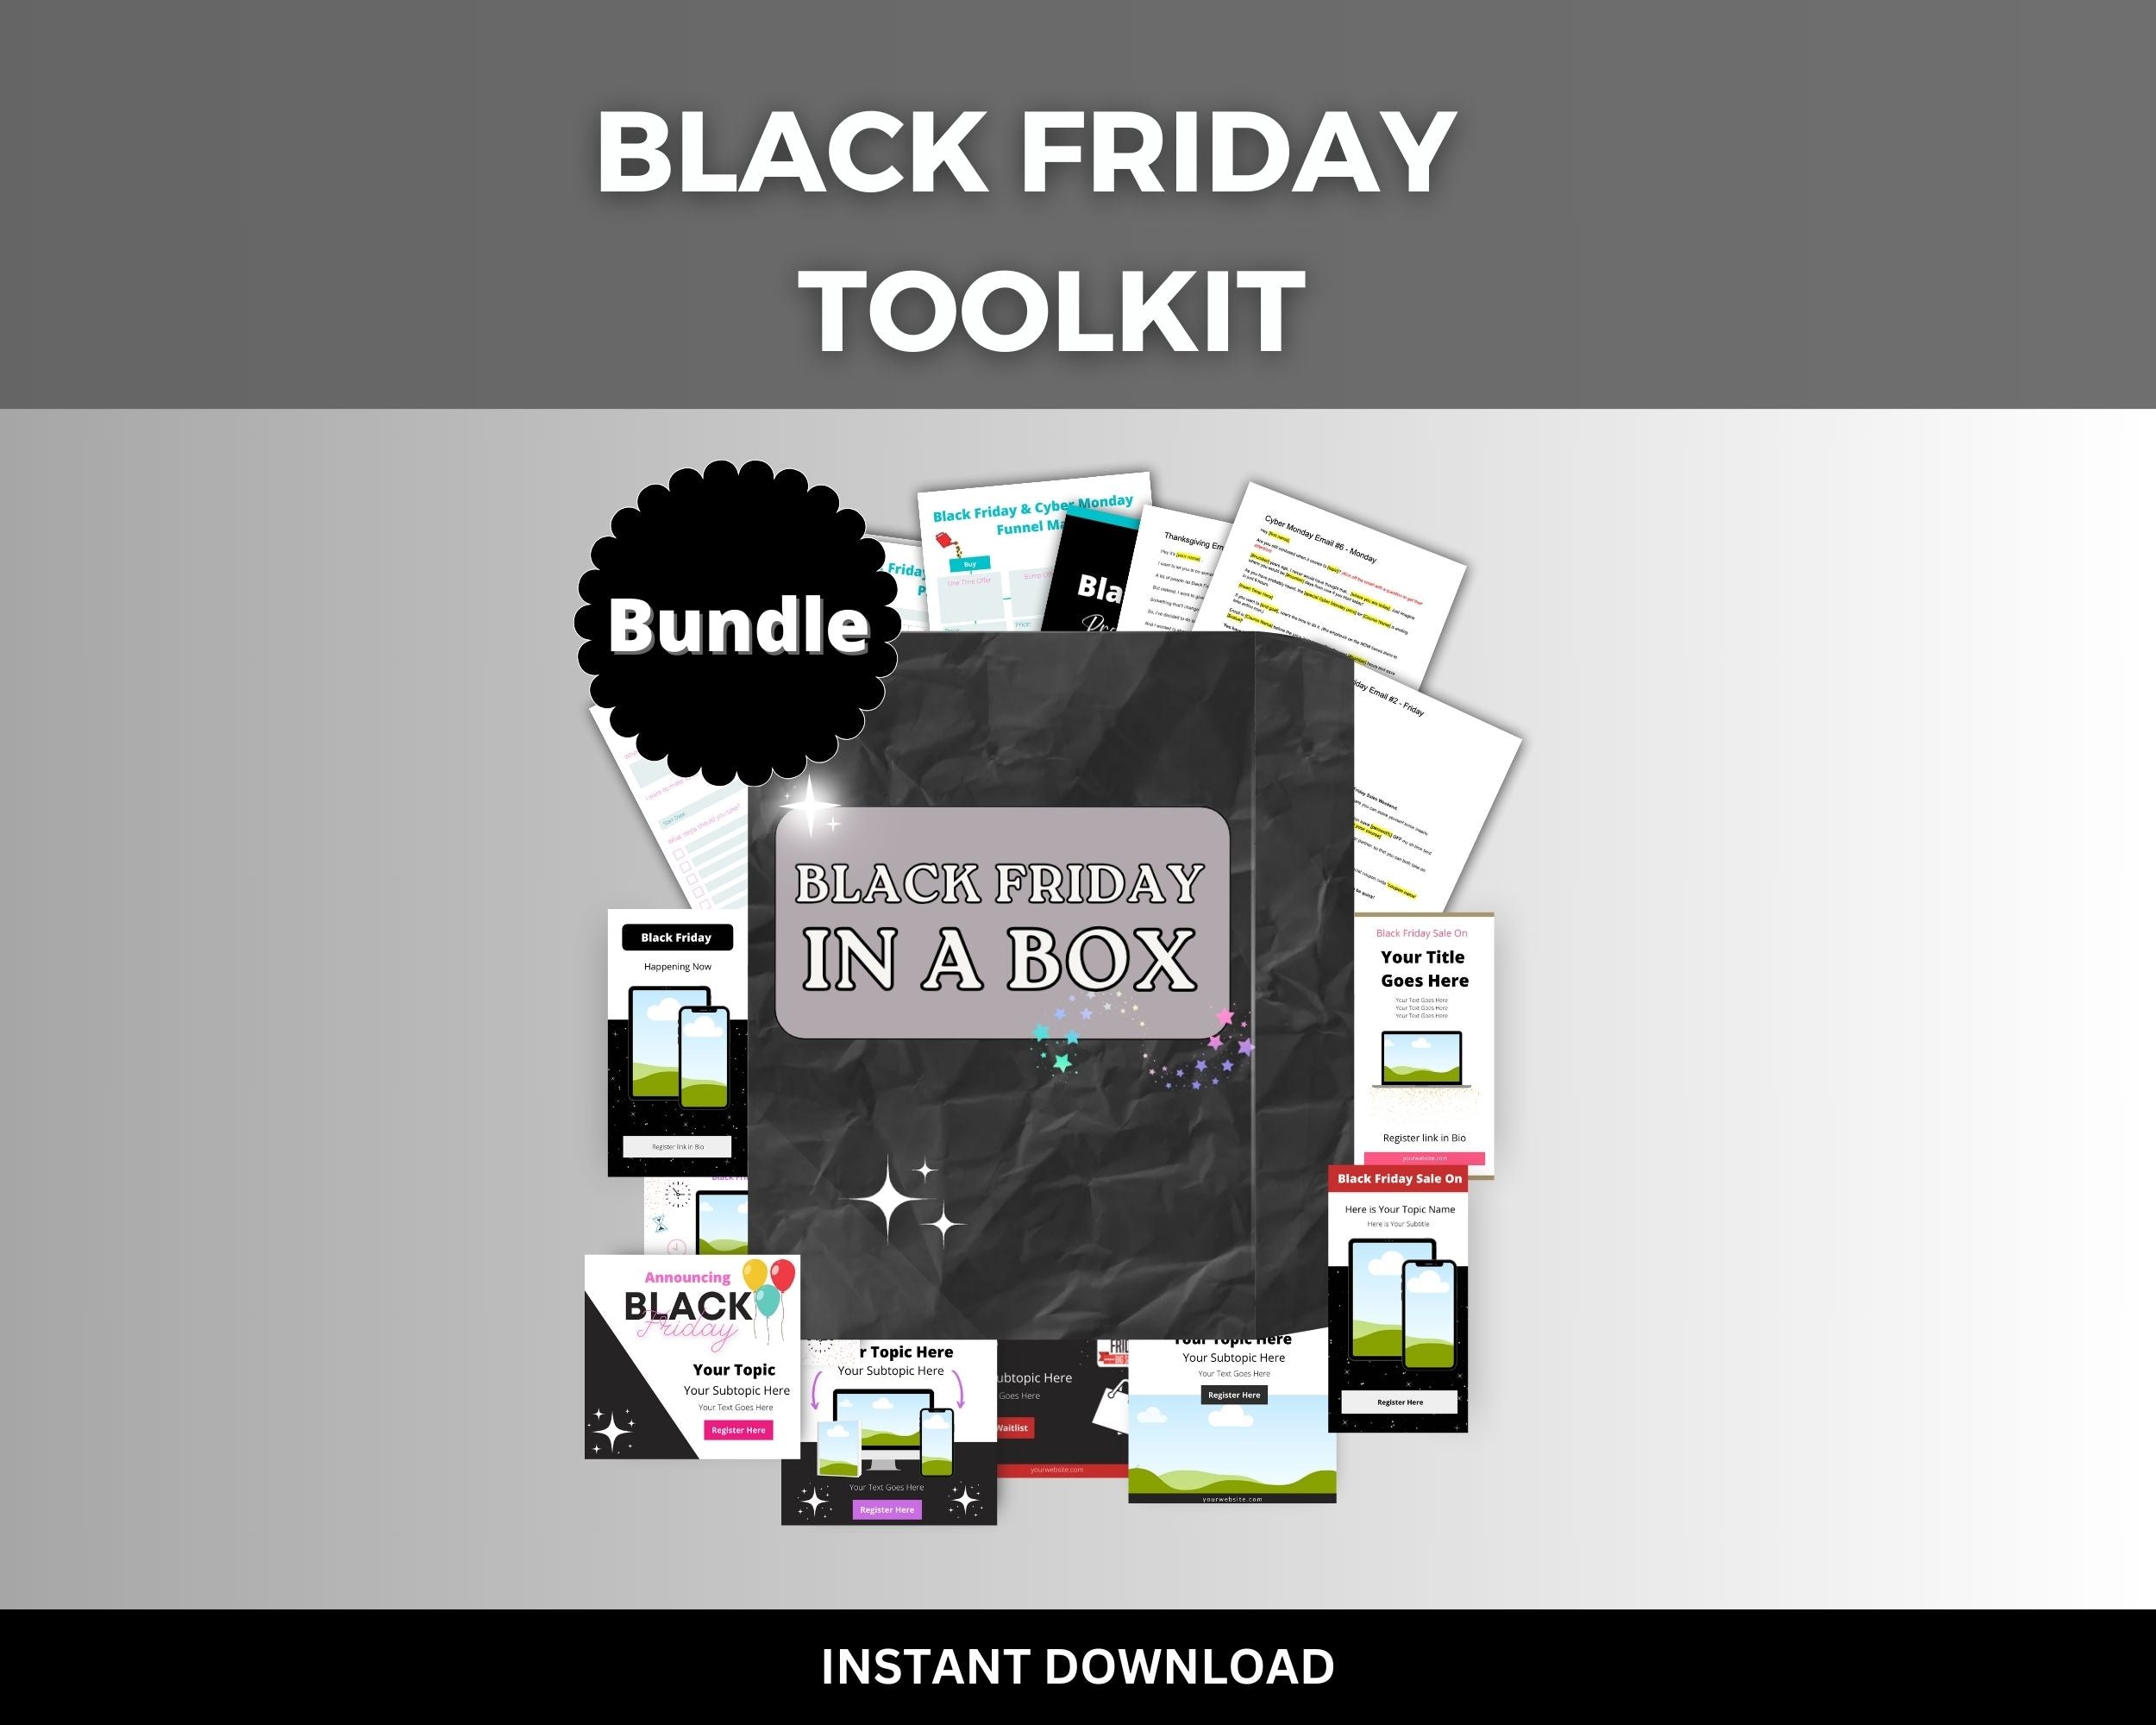 Black Friday Toolkit  Done For You Black Friday Promotion  Course Creator Tools